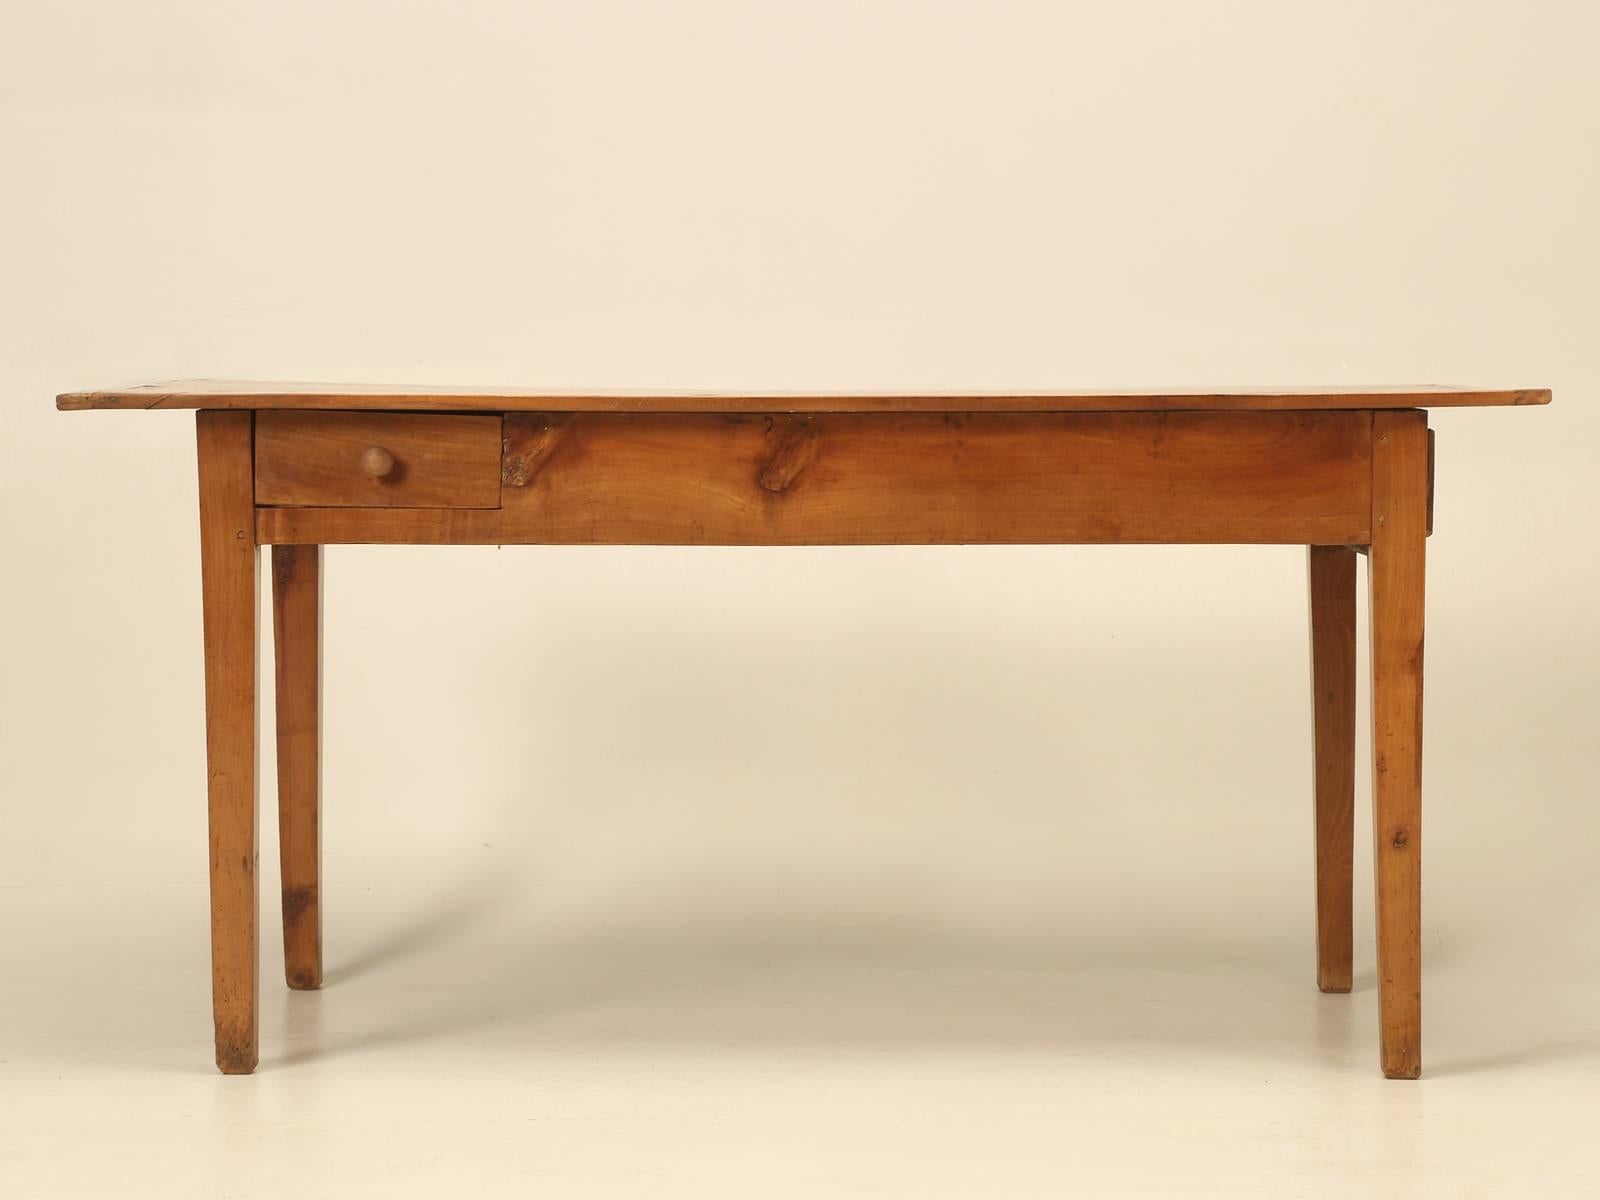 Hand-Crafted Antique Country French Farm Table or Kitchen Table in Cherry Wood c1880-1900